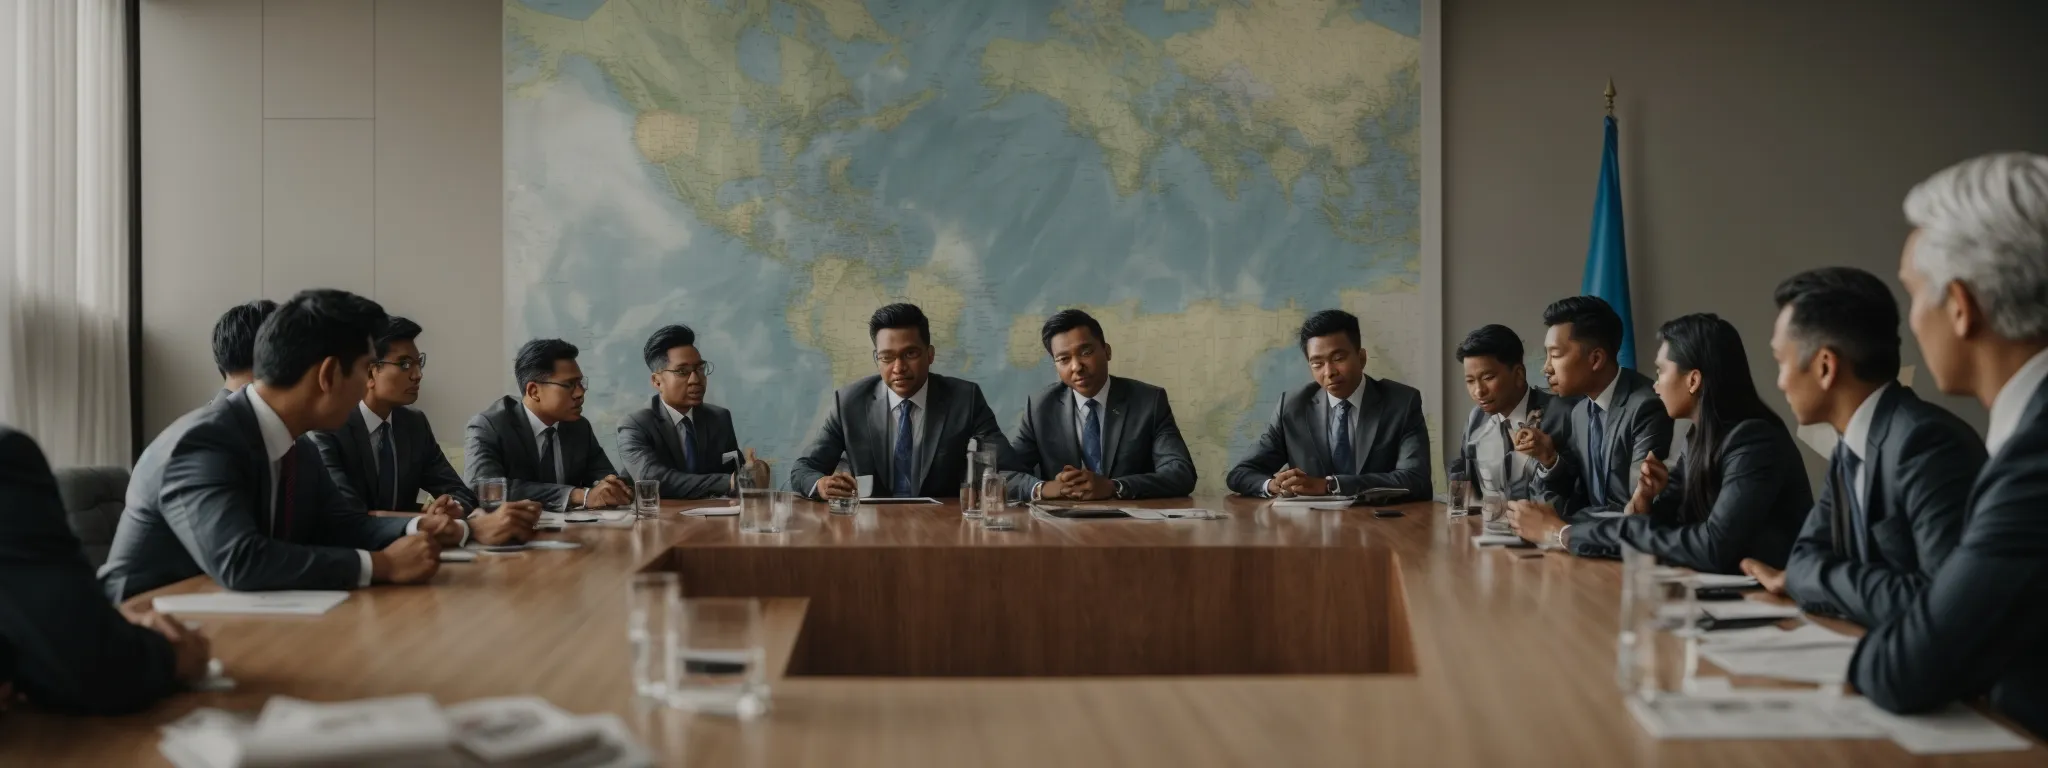 a group of business professionals gathered around a conference table with a world map and a pin on a local city.